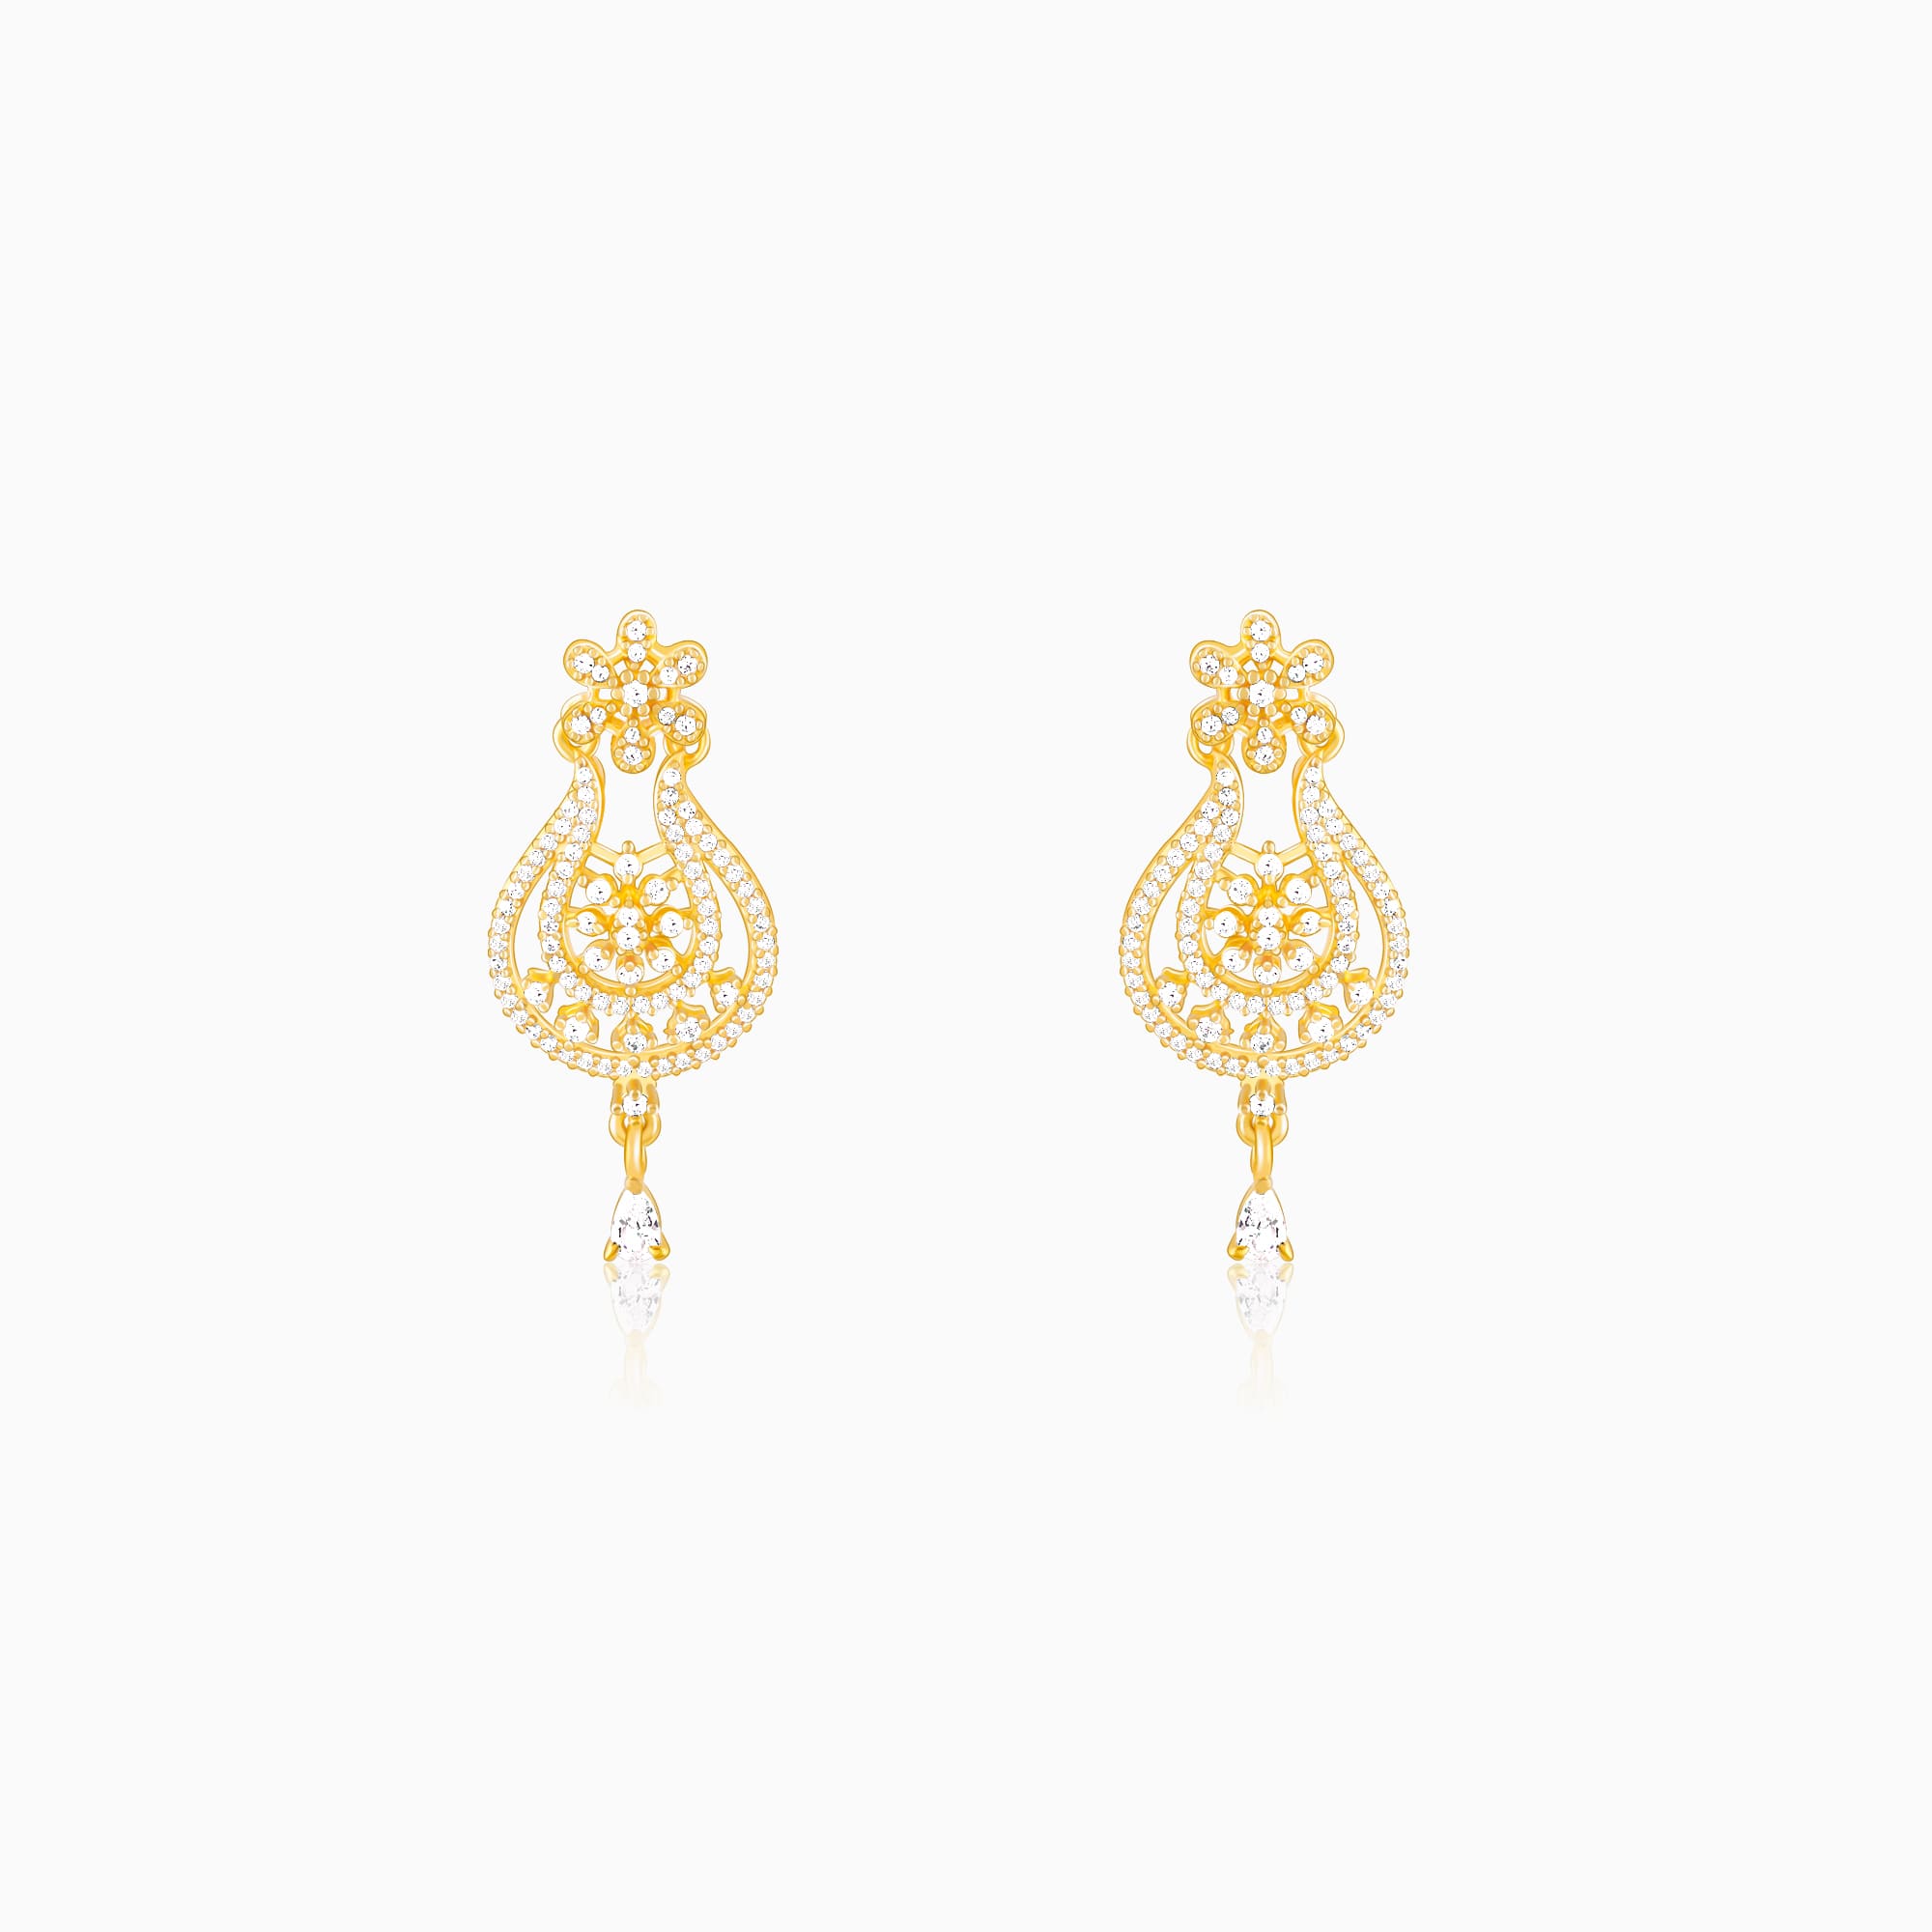 Gold Chandbali Ear Ring in Howrah - Dealers, Manufacturers & Suppliers -  Justdial